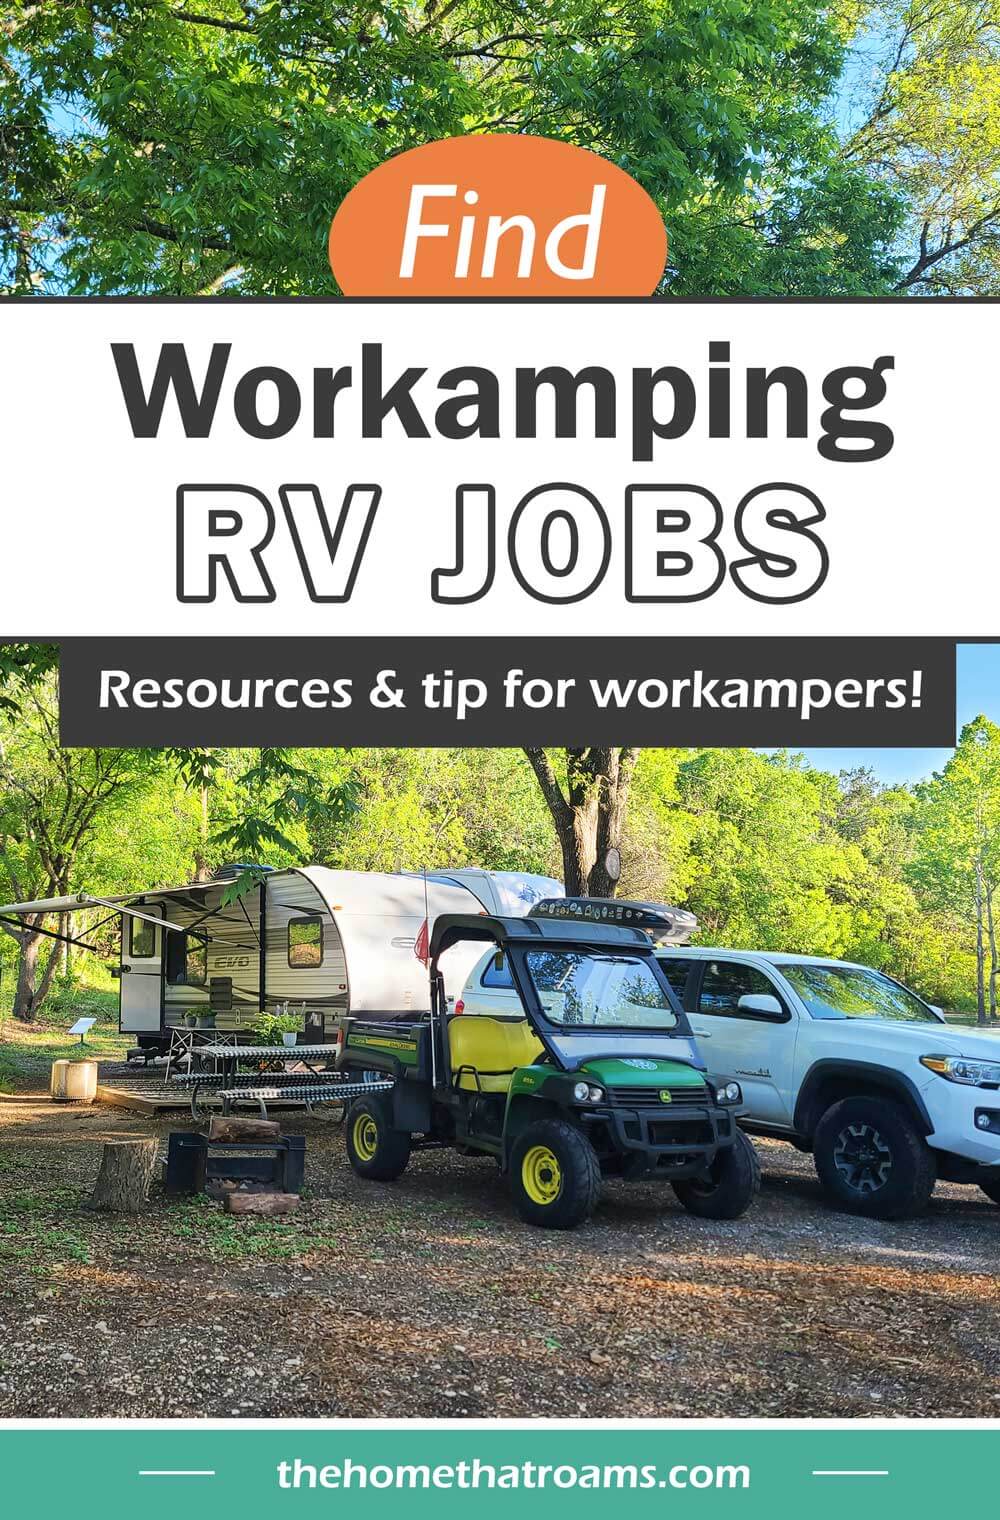 Pinterest image of RV parked in workamping campsite with campground golf cart, overlayed text "Find Workamping RV Jobs: Resources and tips for workampers".